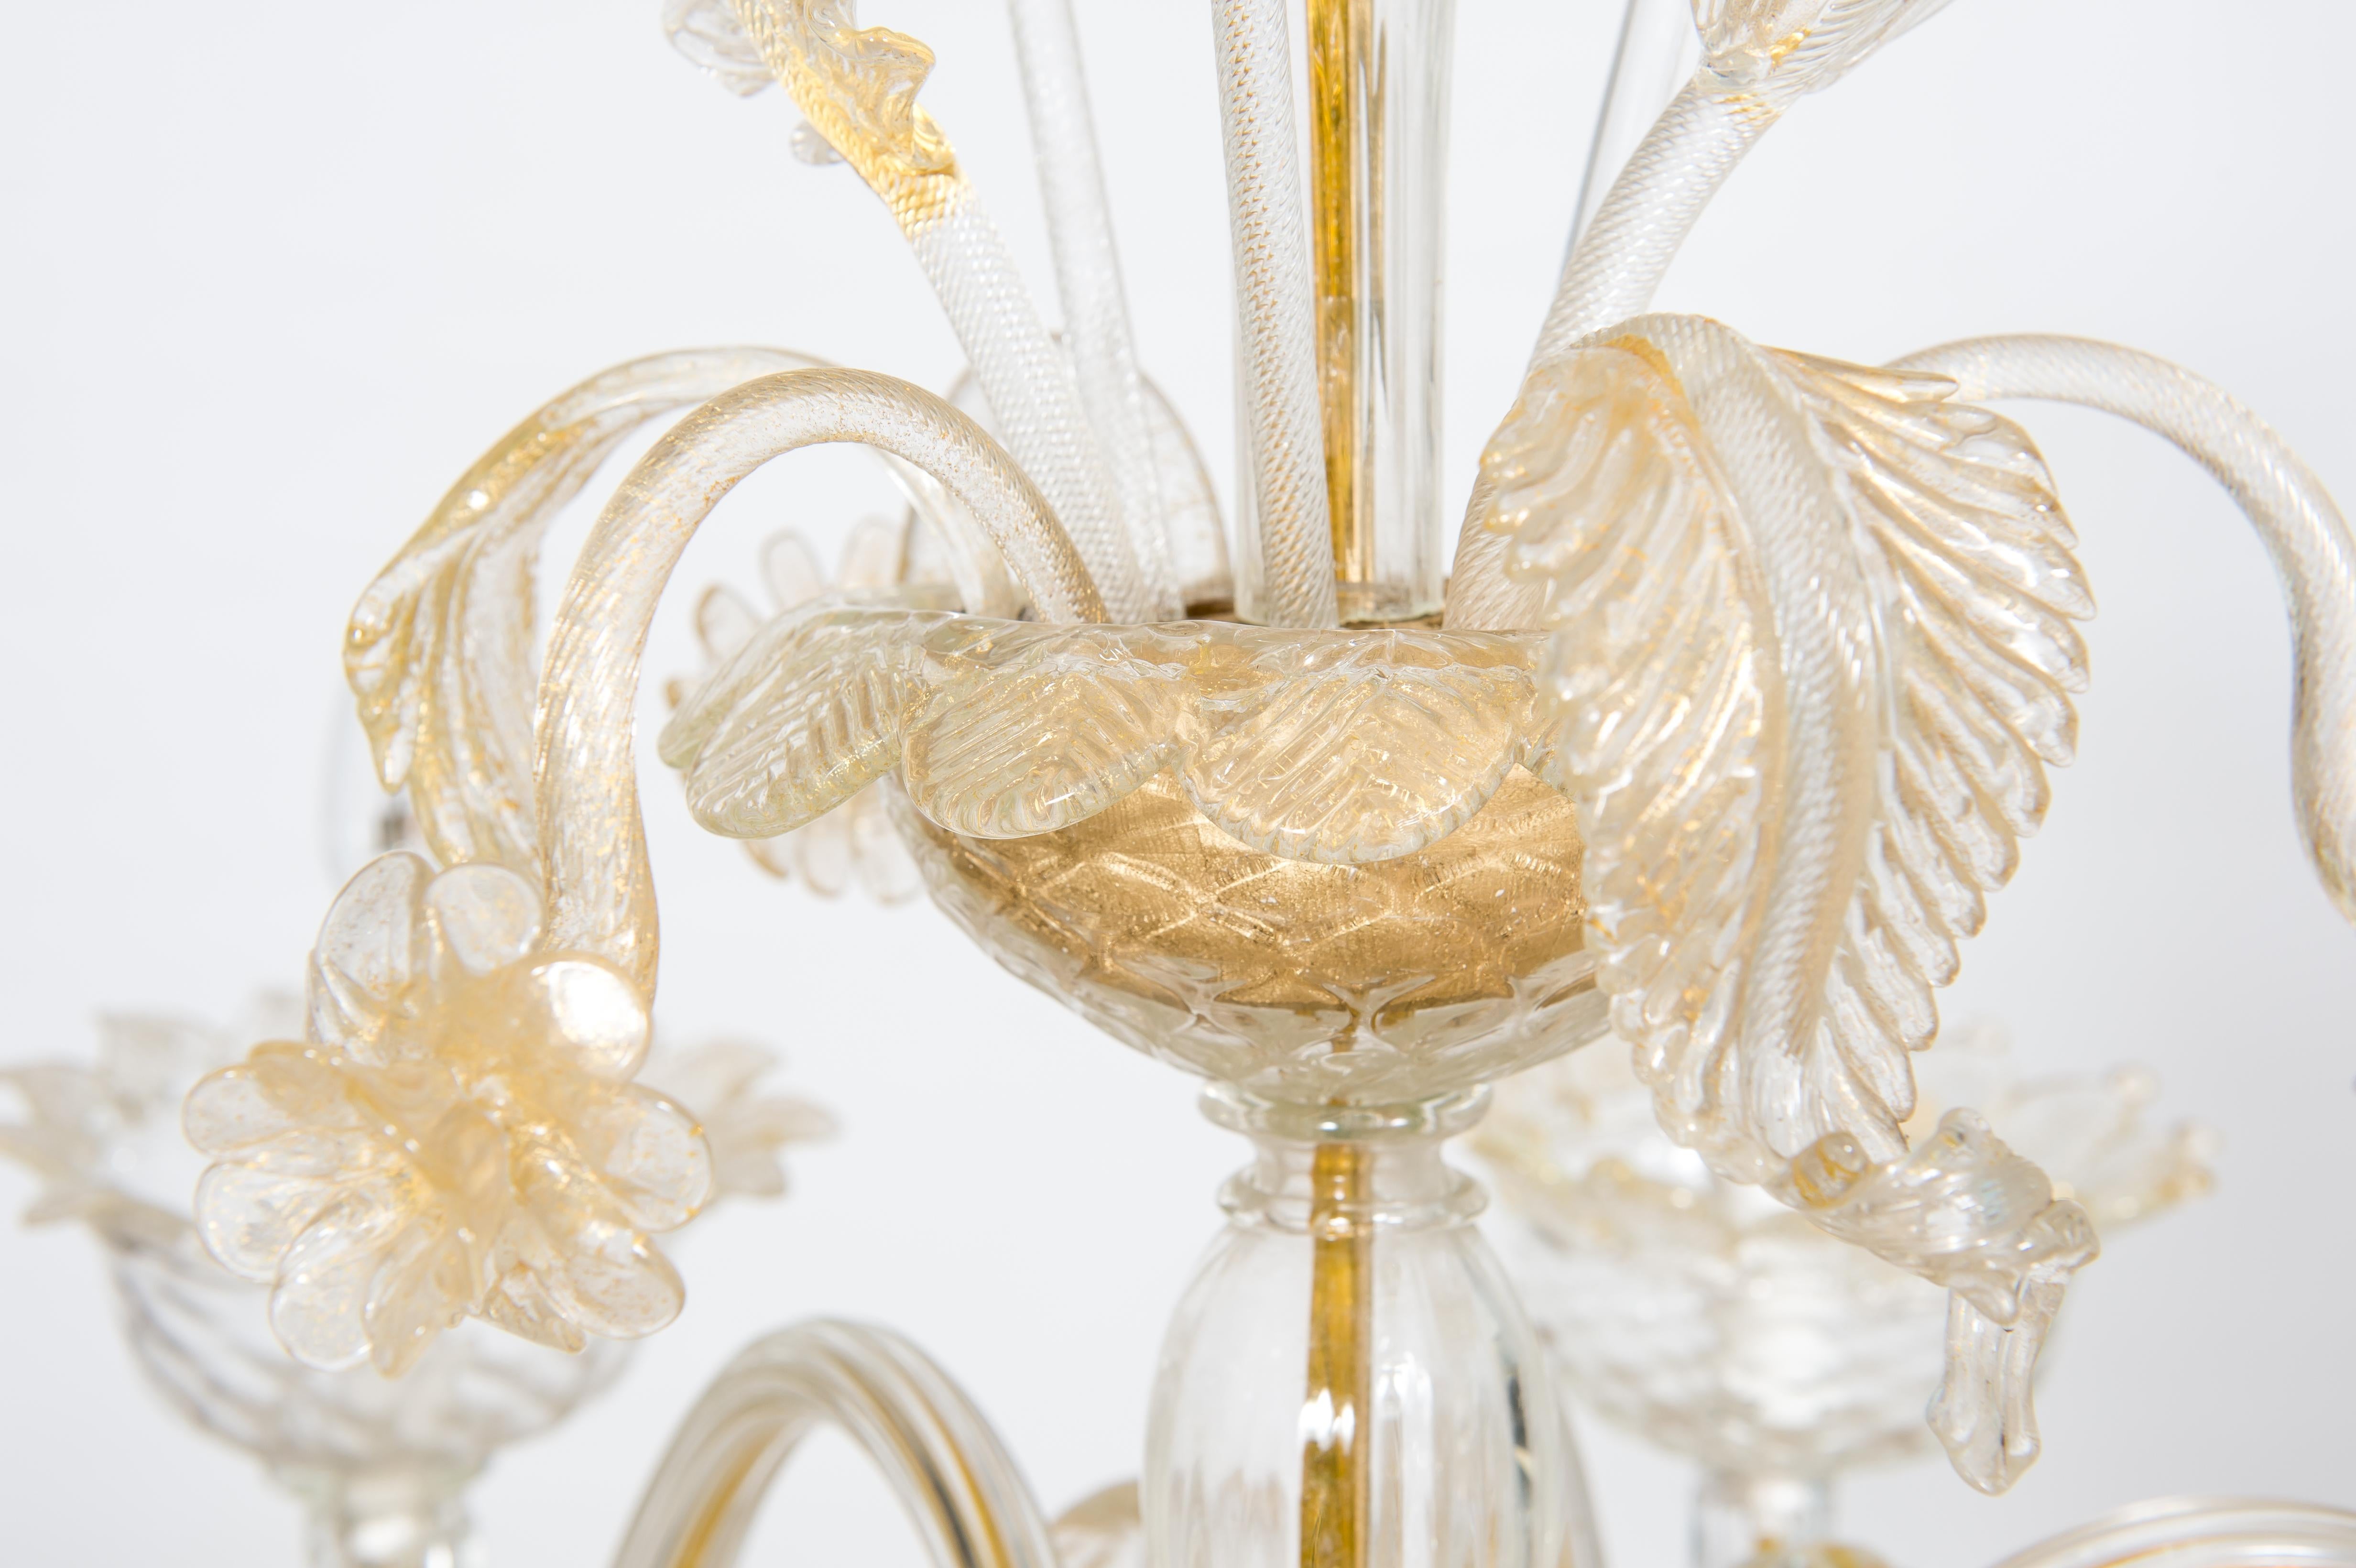 Golden Murano Glass Chandelier with “Vere” Decorations, 20th Century, Italy For Sale 1